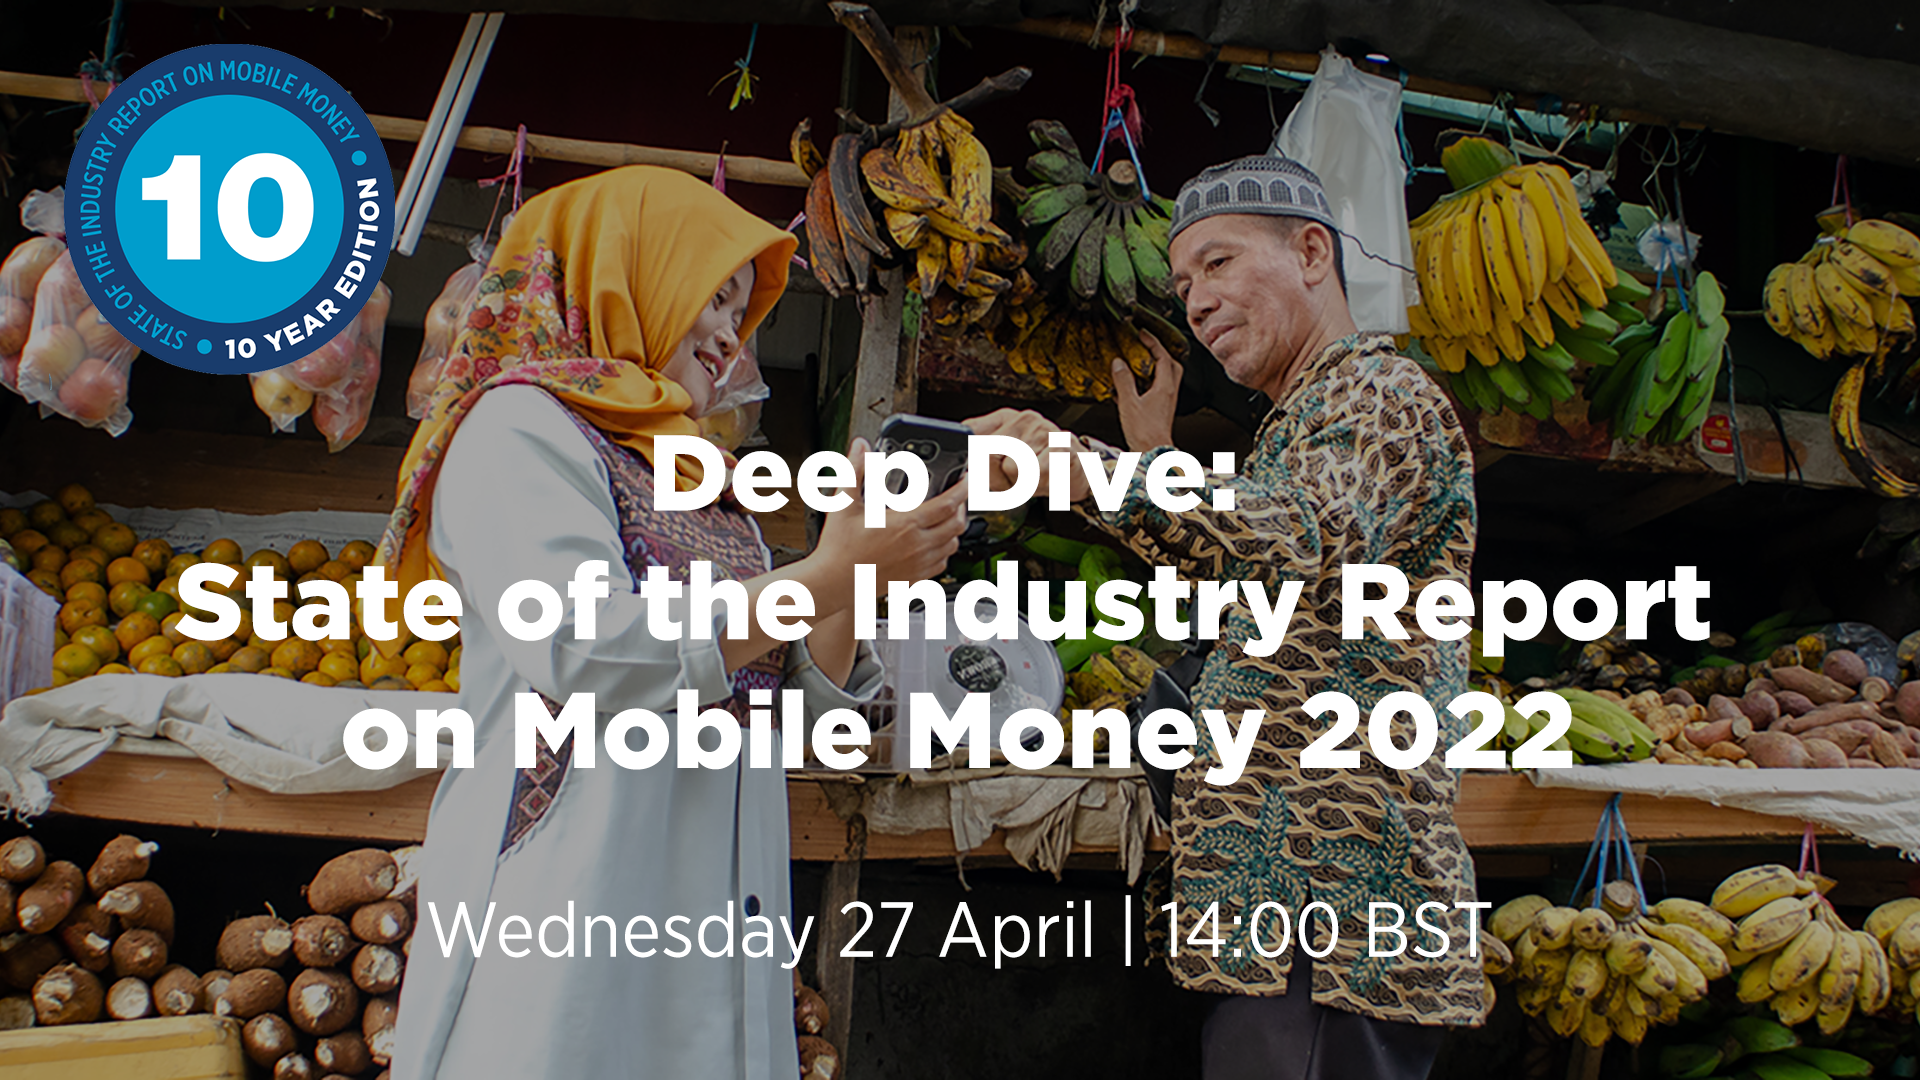 Deep Dive: State of the Industry Report on Mobile Money 2022